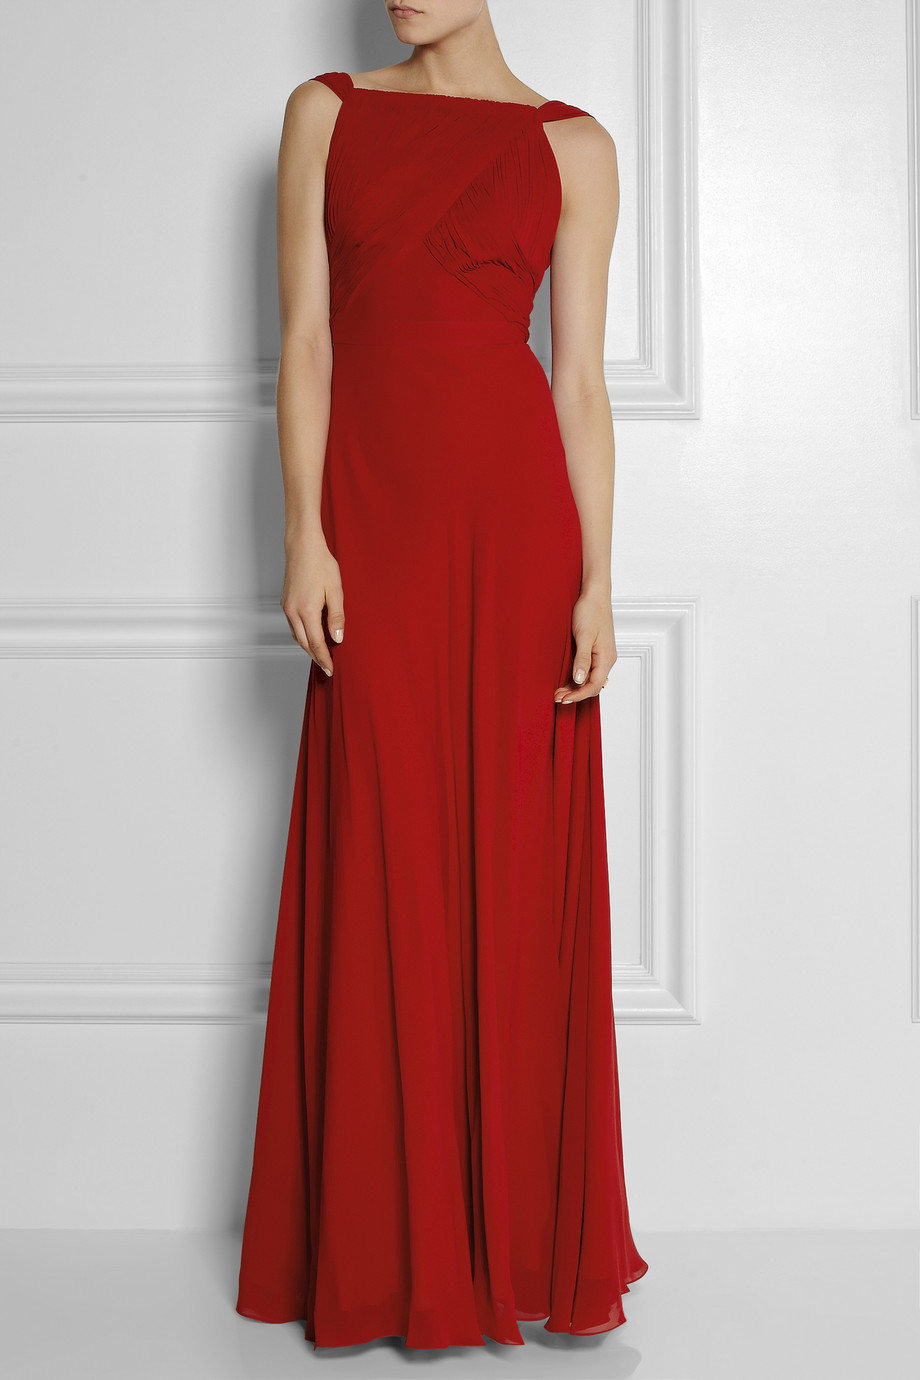 Saint laurent Hand-pleated Silk-georgette Gown in Red | Lyst